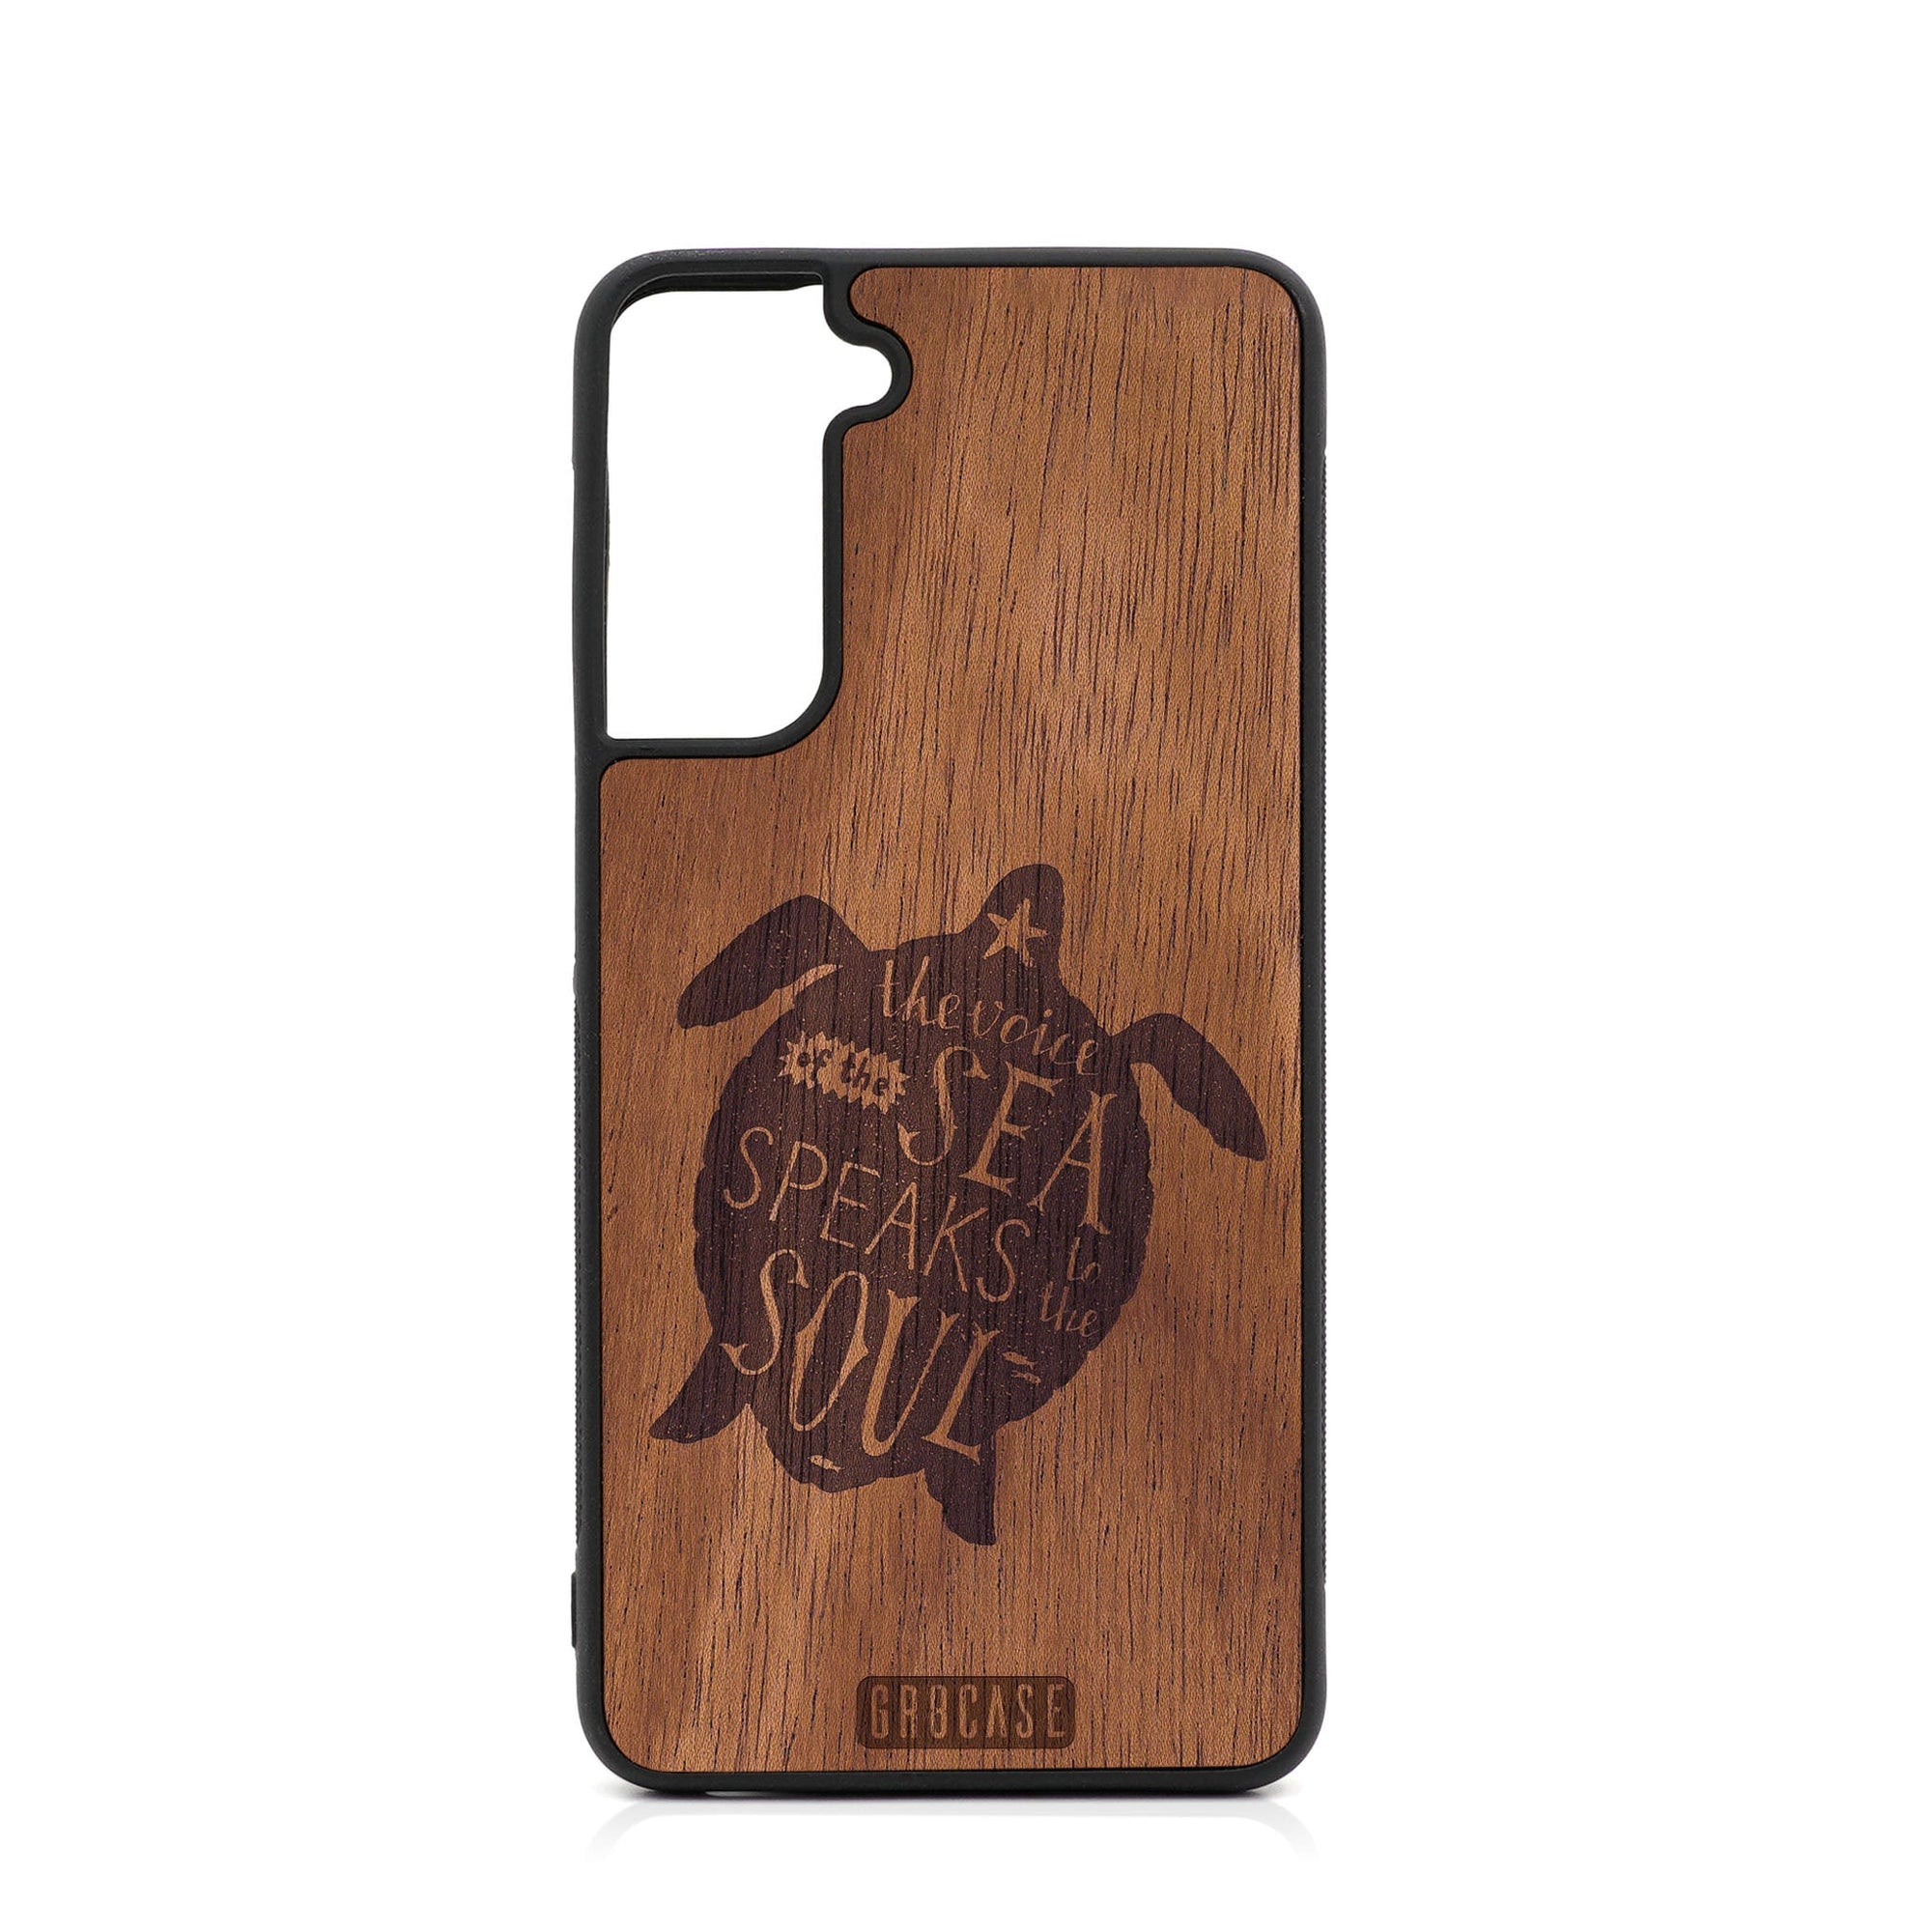 The Voice Of The Sea Speaks To The Soul (Turtle) Design Wood Case For Samsung Galaxy S22 Plus